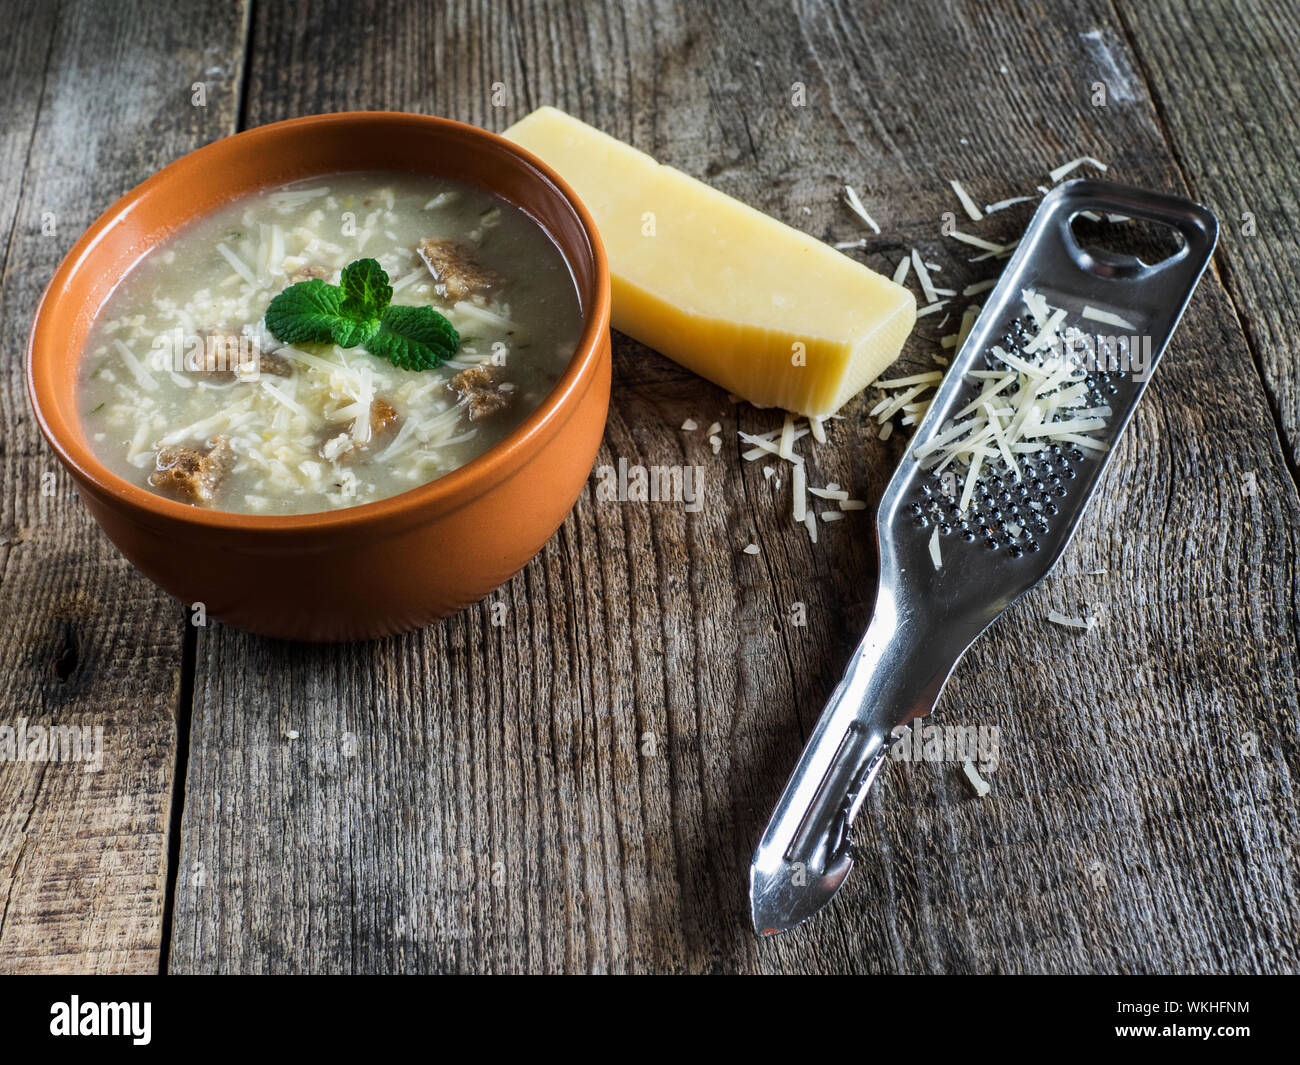 Close-up Of Vegetable Soup With Croutons And Grated Cheese On Wooden Table Stock Photo